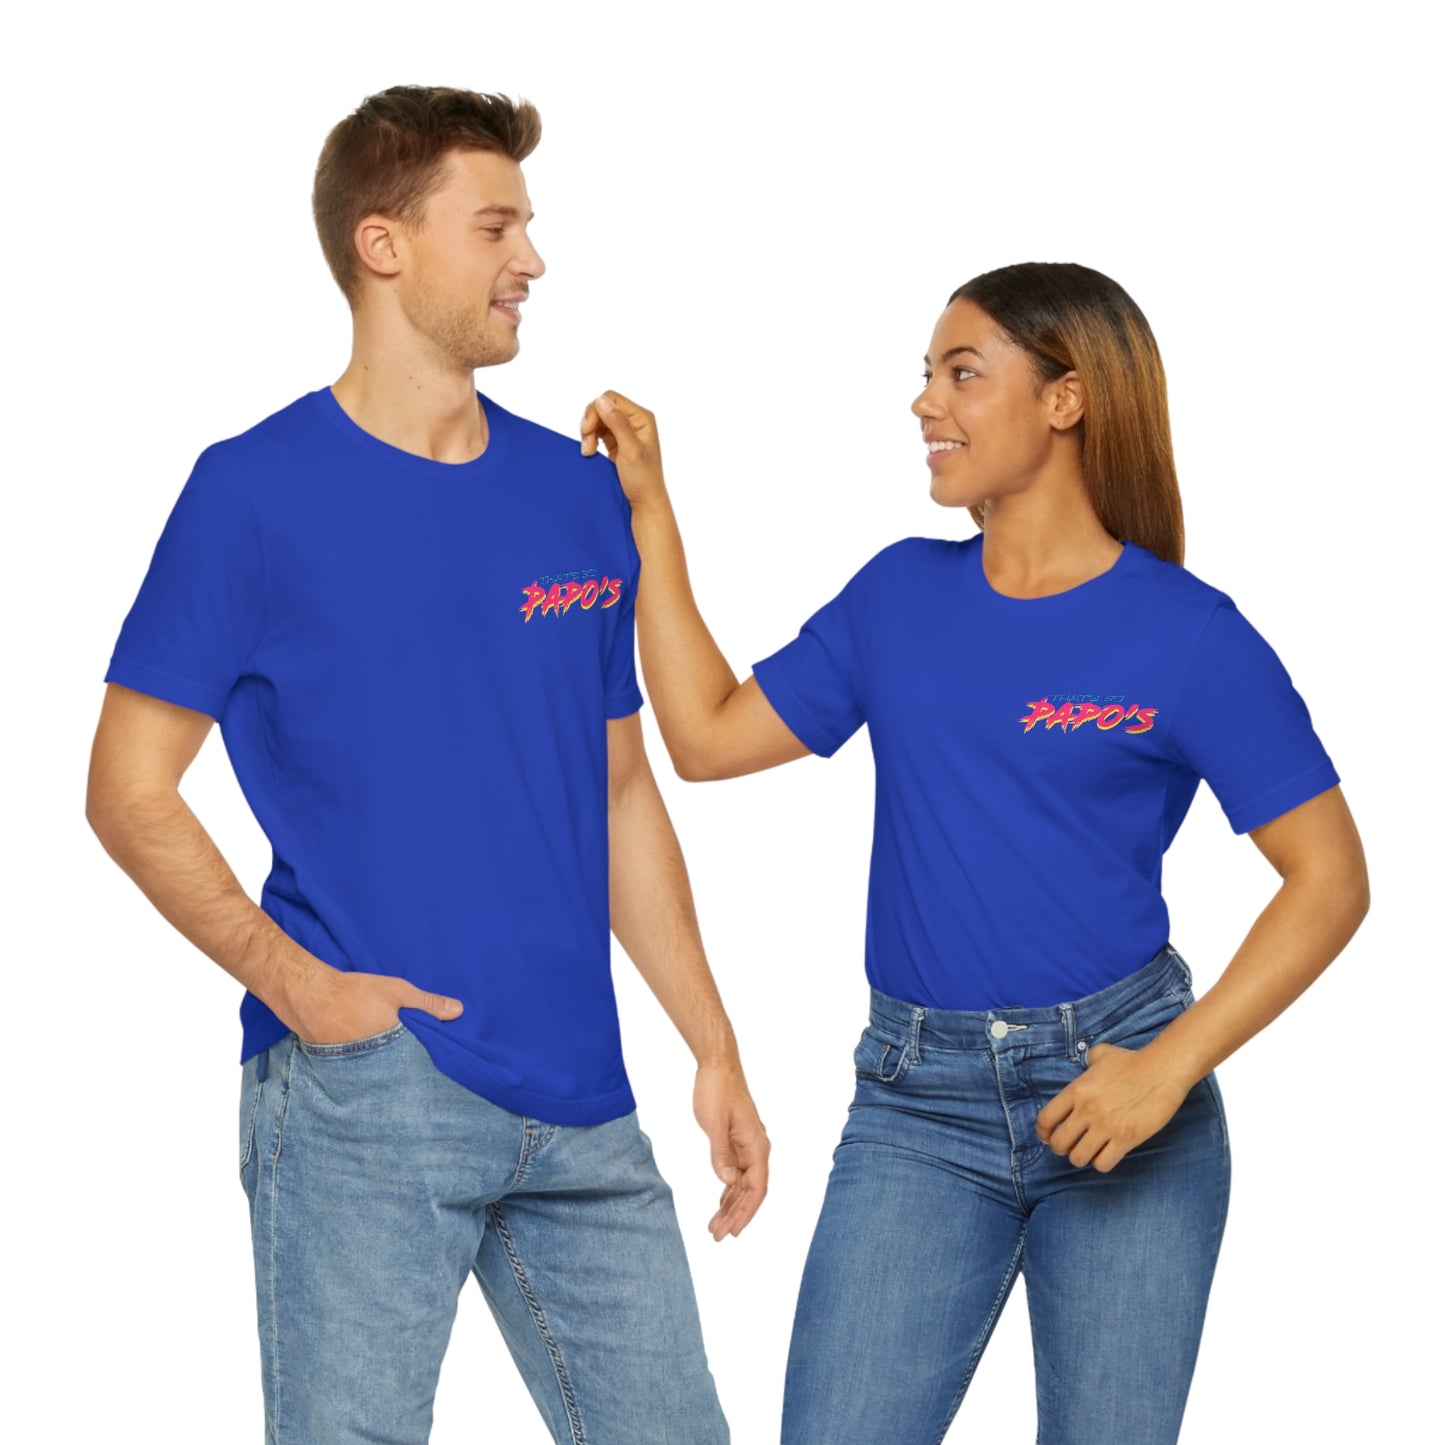 That's So PaPo's Back Logo Unisex Jersey Short Sleeve Tee